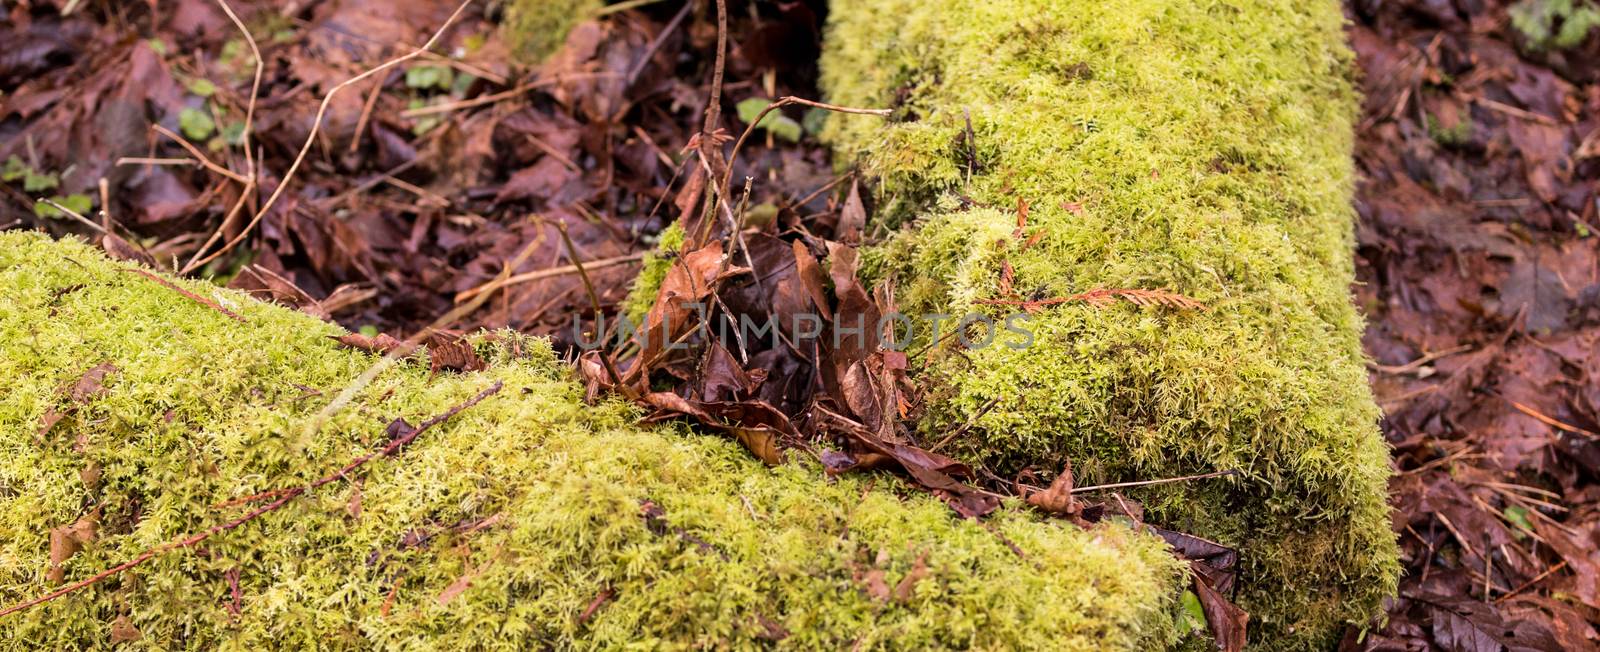 Moss covered fallen logs with brown decaying fallen leaves by experiencesnw